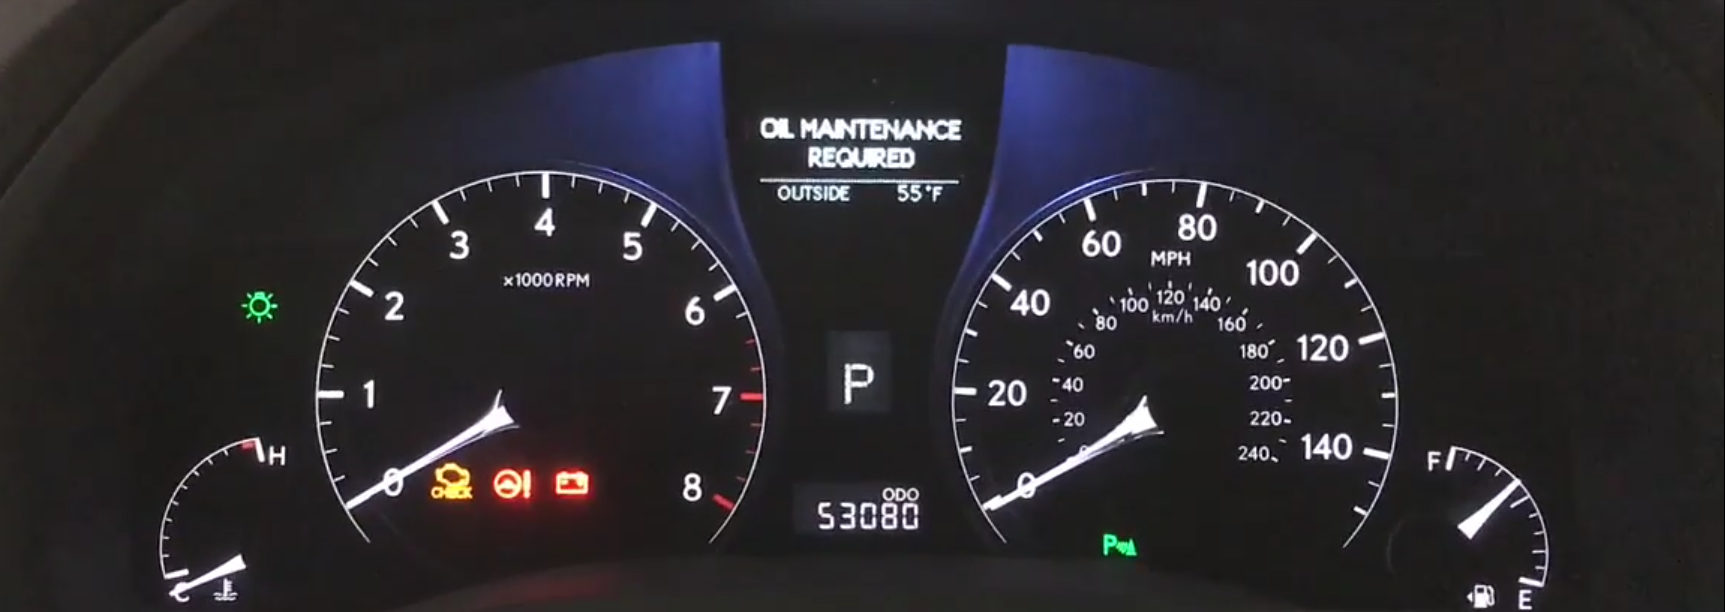 How to reset maintenance light on 2016 lexus rx 350 How To Reset The Maintenance Required Light On A 2012 Lexus Rx 350 How To Automotive